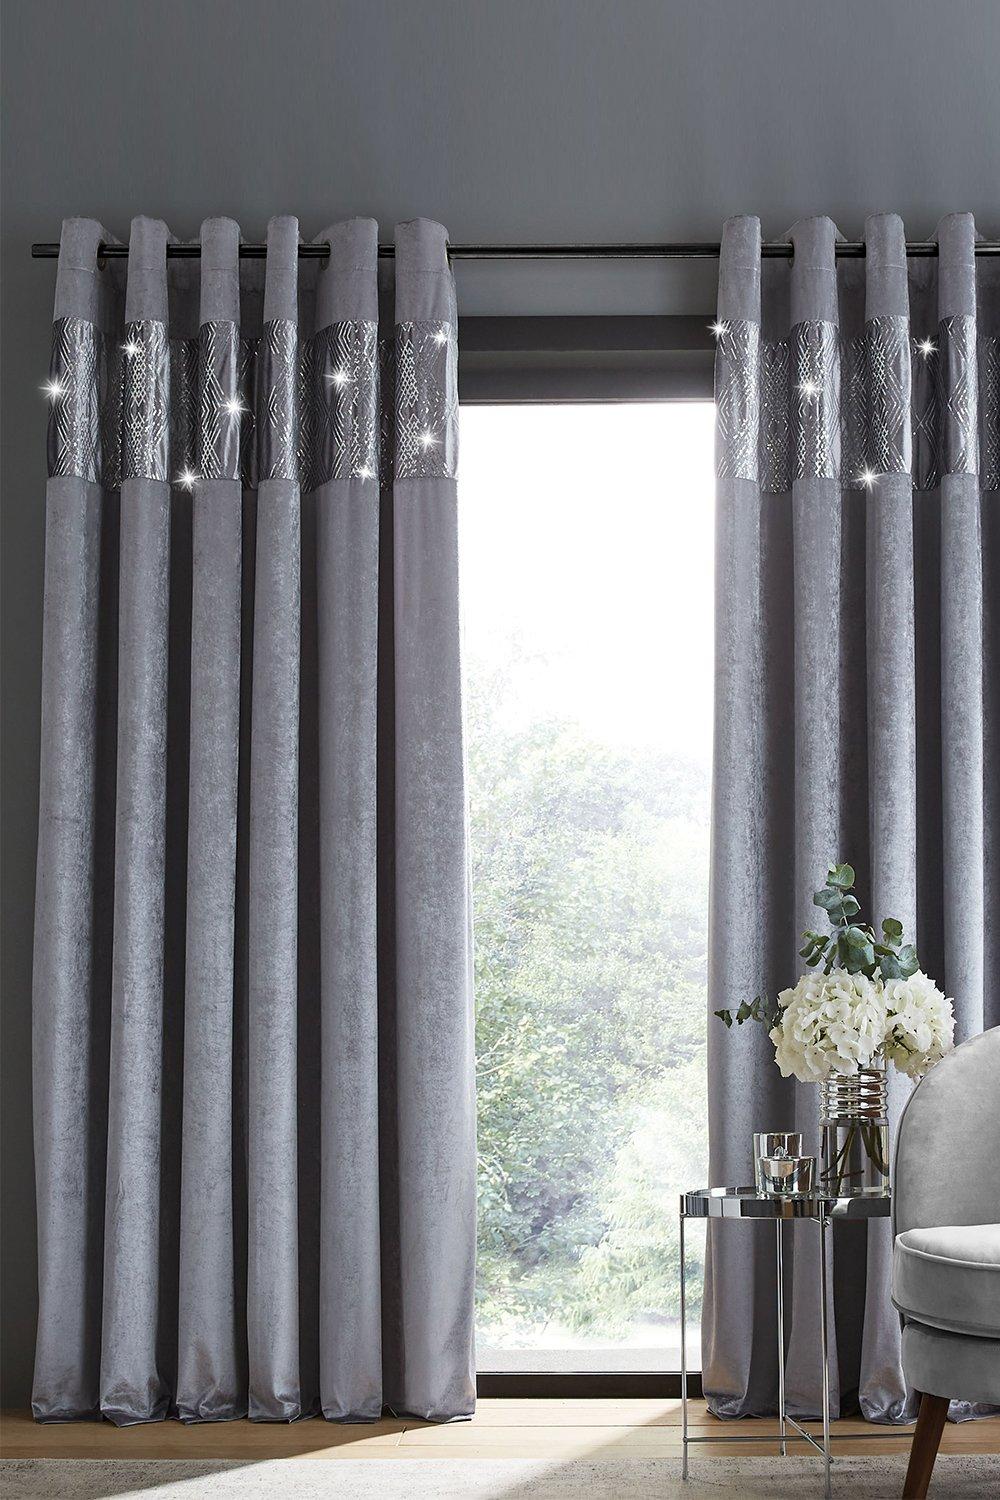 'Crushed Velvet Glamour Sequin' Lined Curtains